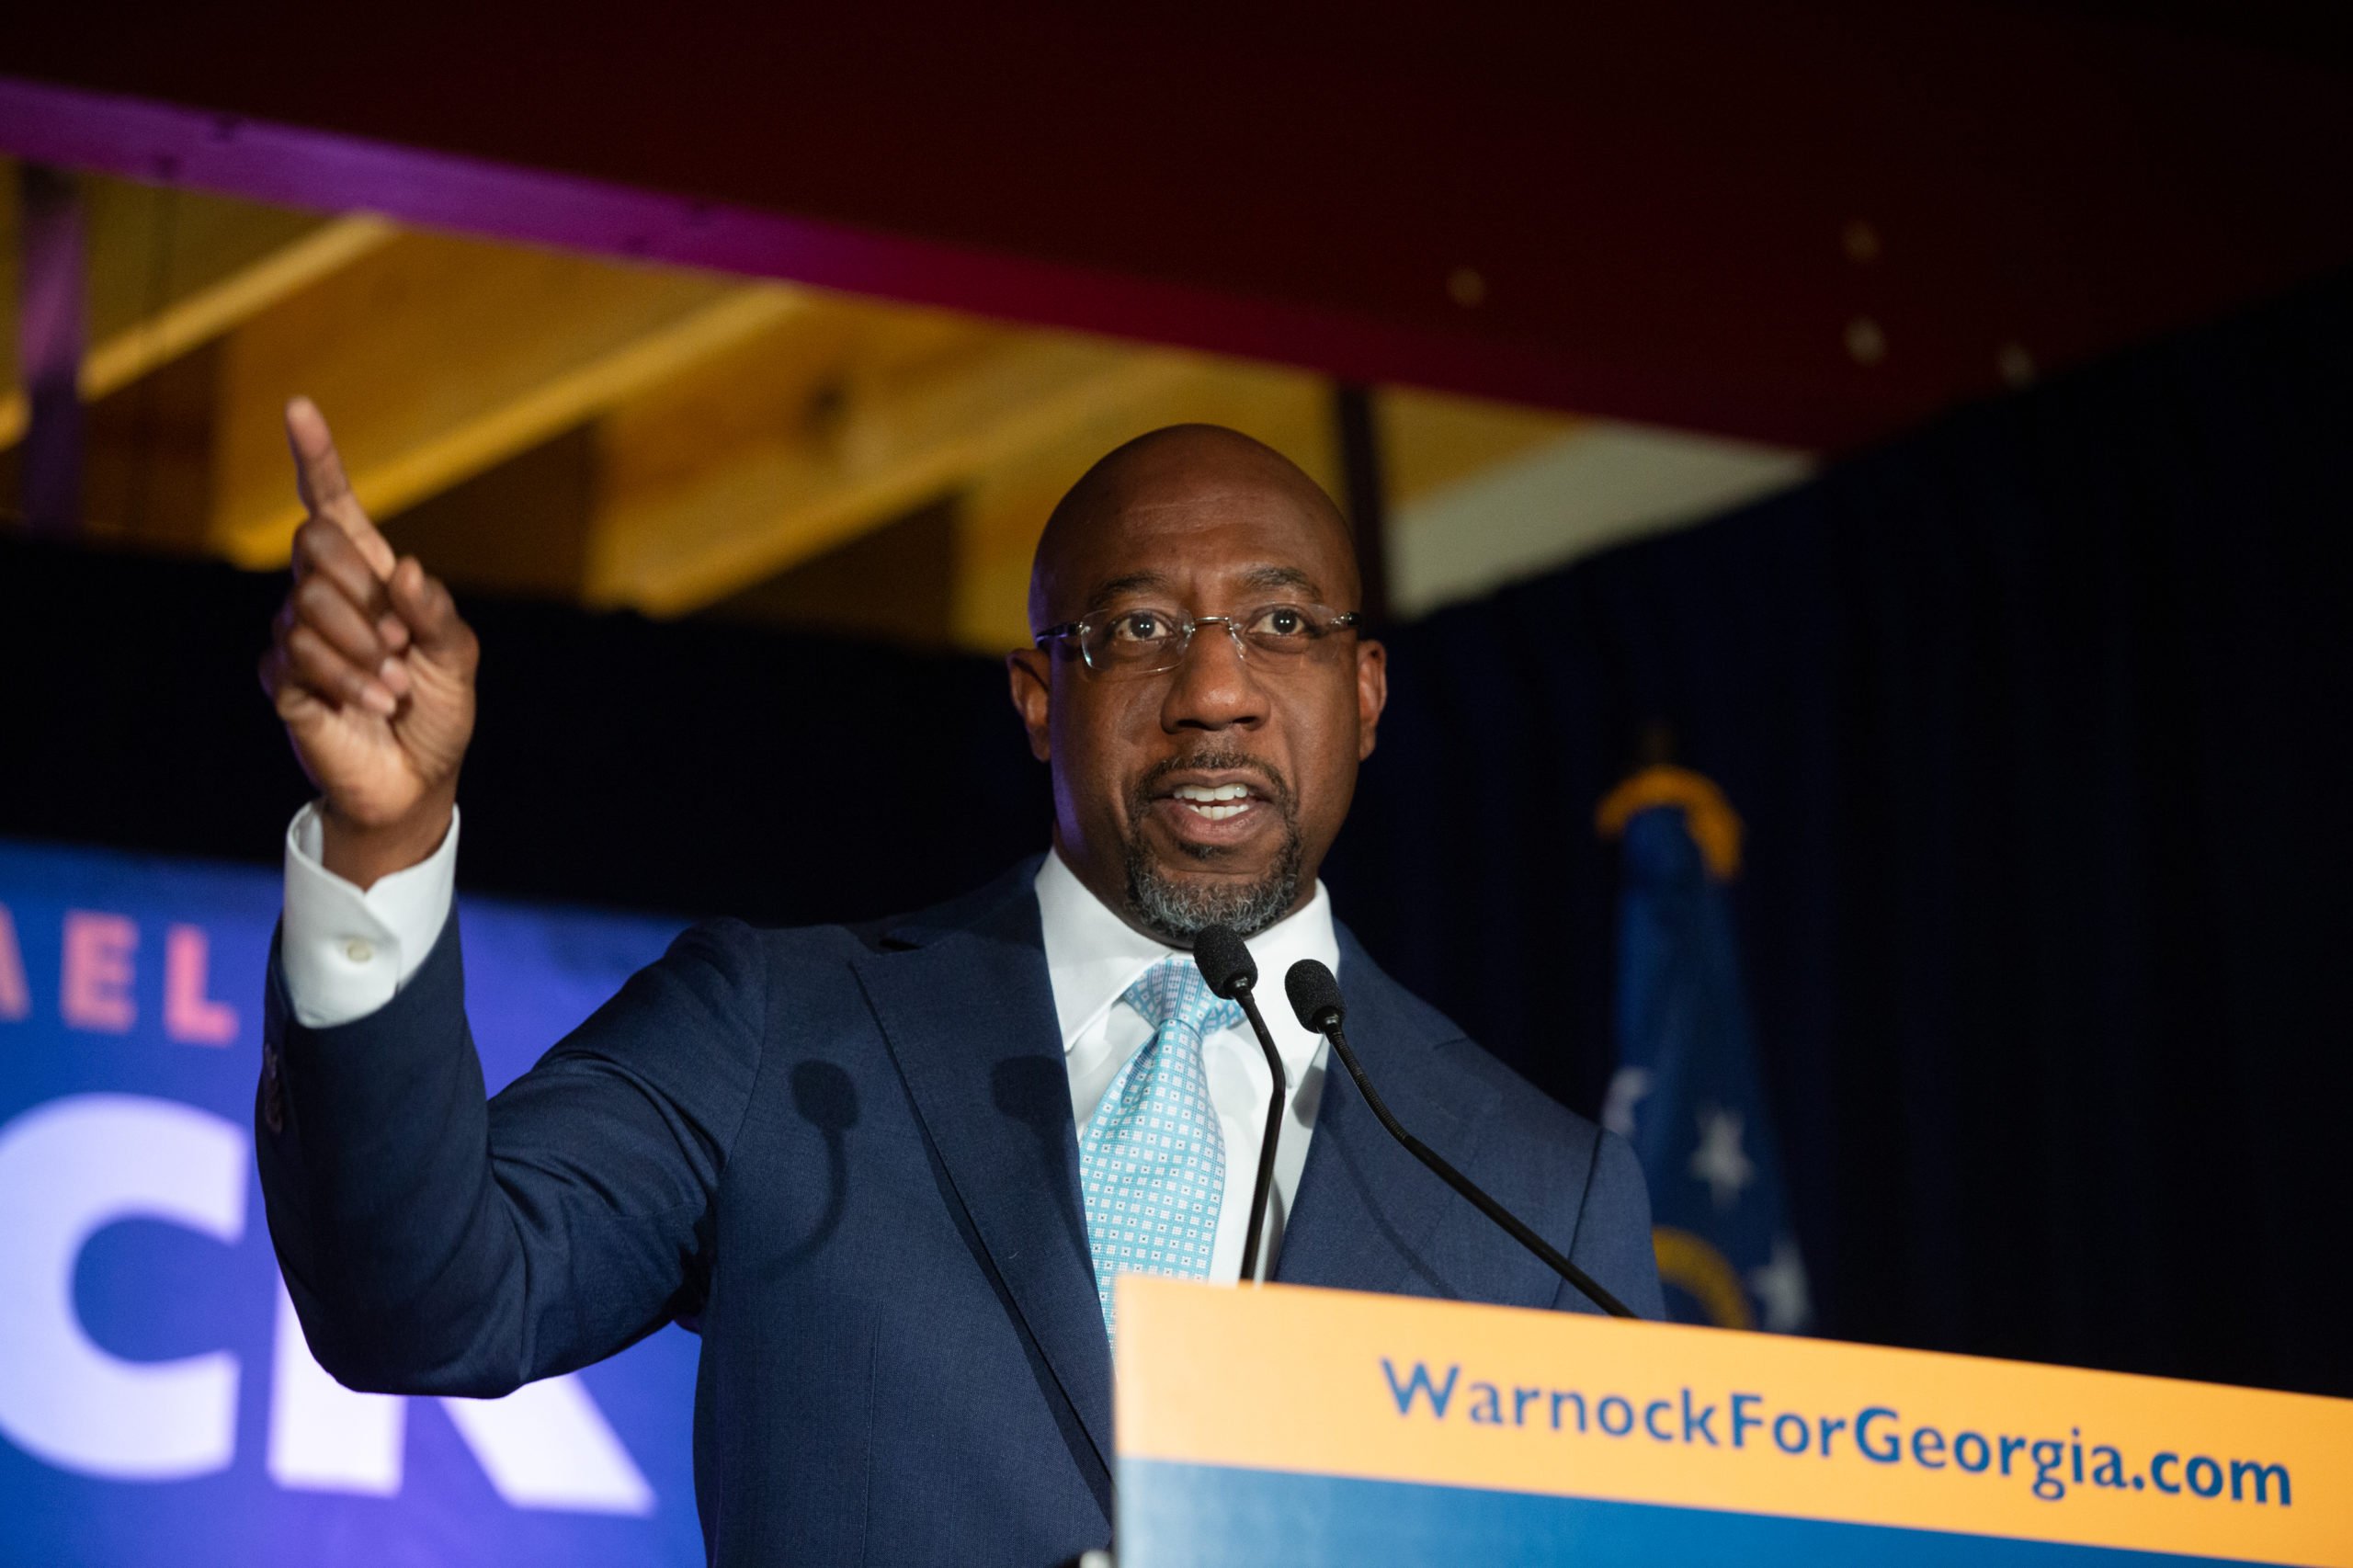 ATLANTA, GA - NOVEMBER 03: Democratic U.S. Senate candidate Rev. Raphael Warnock speaks during an Election Night event on November 3, 2020 in Atlanta, Georgia. Democratic Senate candidate Rev. Raphael Warnock is running in a special election against a crowded field, including U.S. Sen. Kelly Loeffler (R-GA), who was appointed by Gov. Brian Kemp to replace Johnny Isakson at the end of last year. Georgia is the only state with two Senate seats on the November 3 ballot. (Photo by Jessica McGowan/Getty Images)